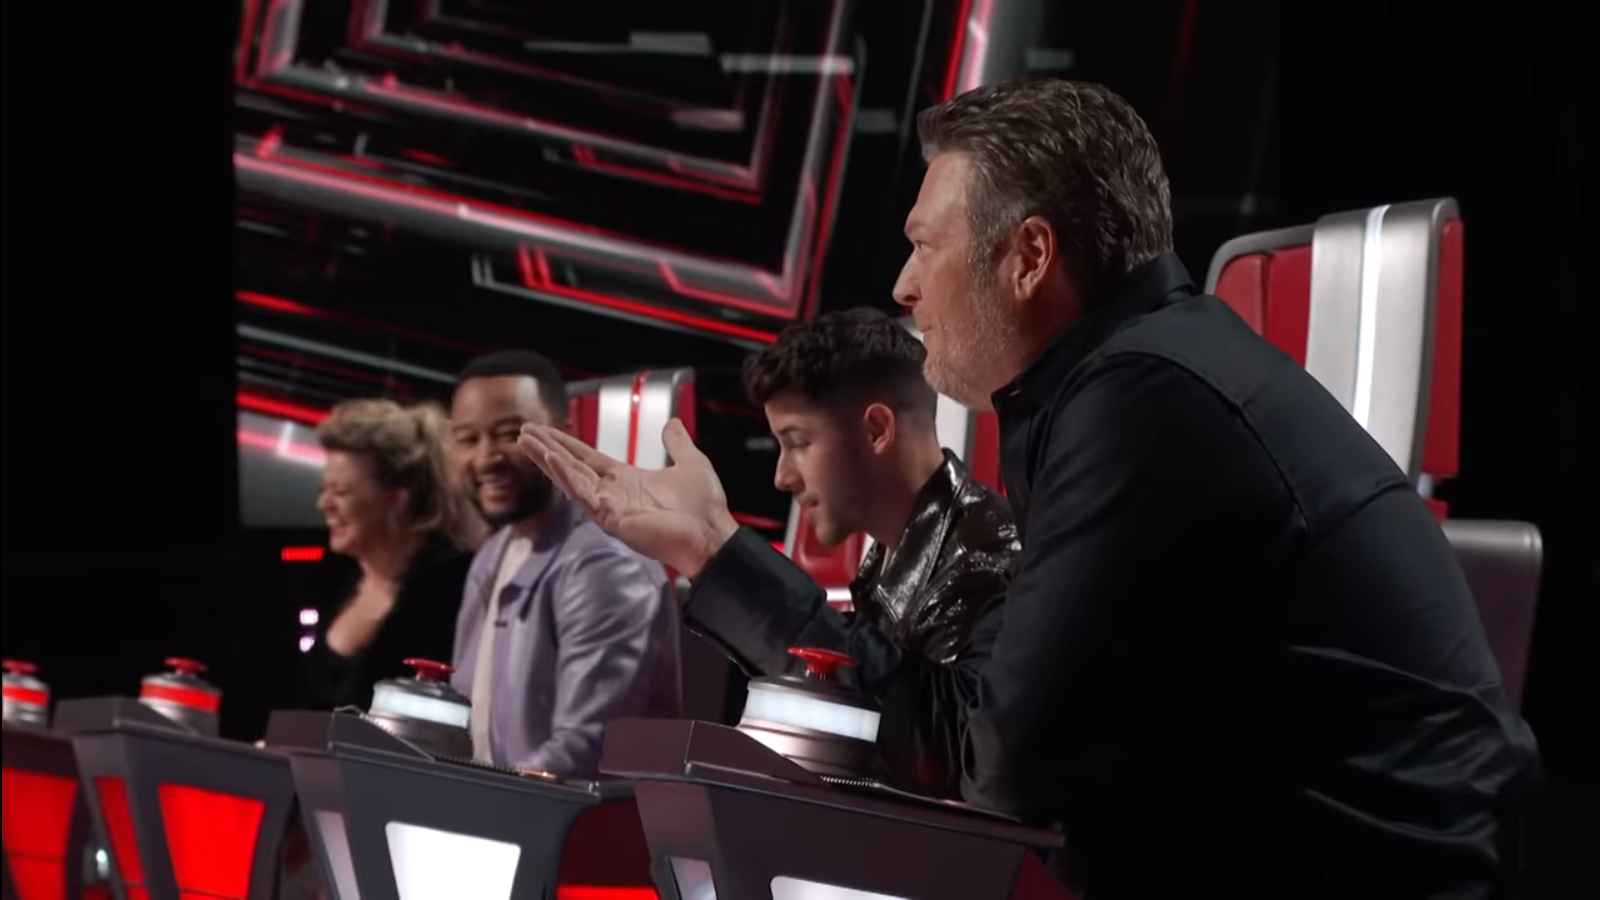 What to expect from Season 20, Episode 1 of The Voice